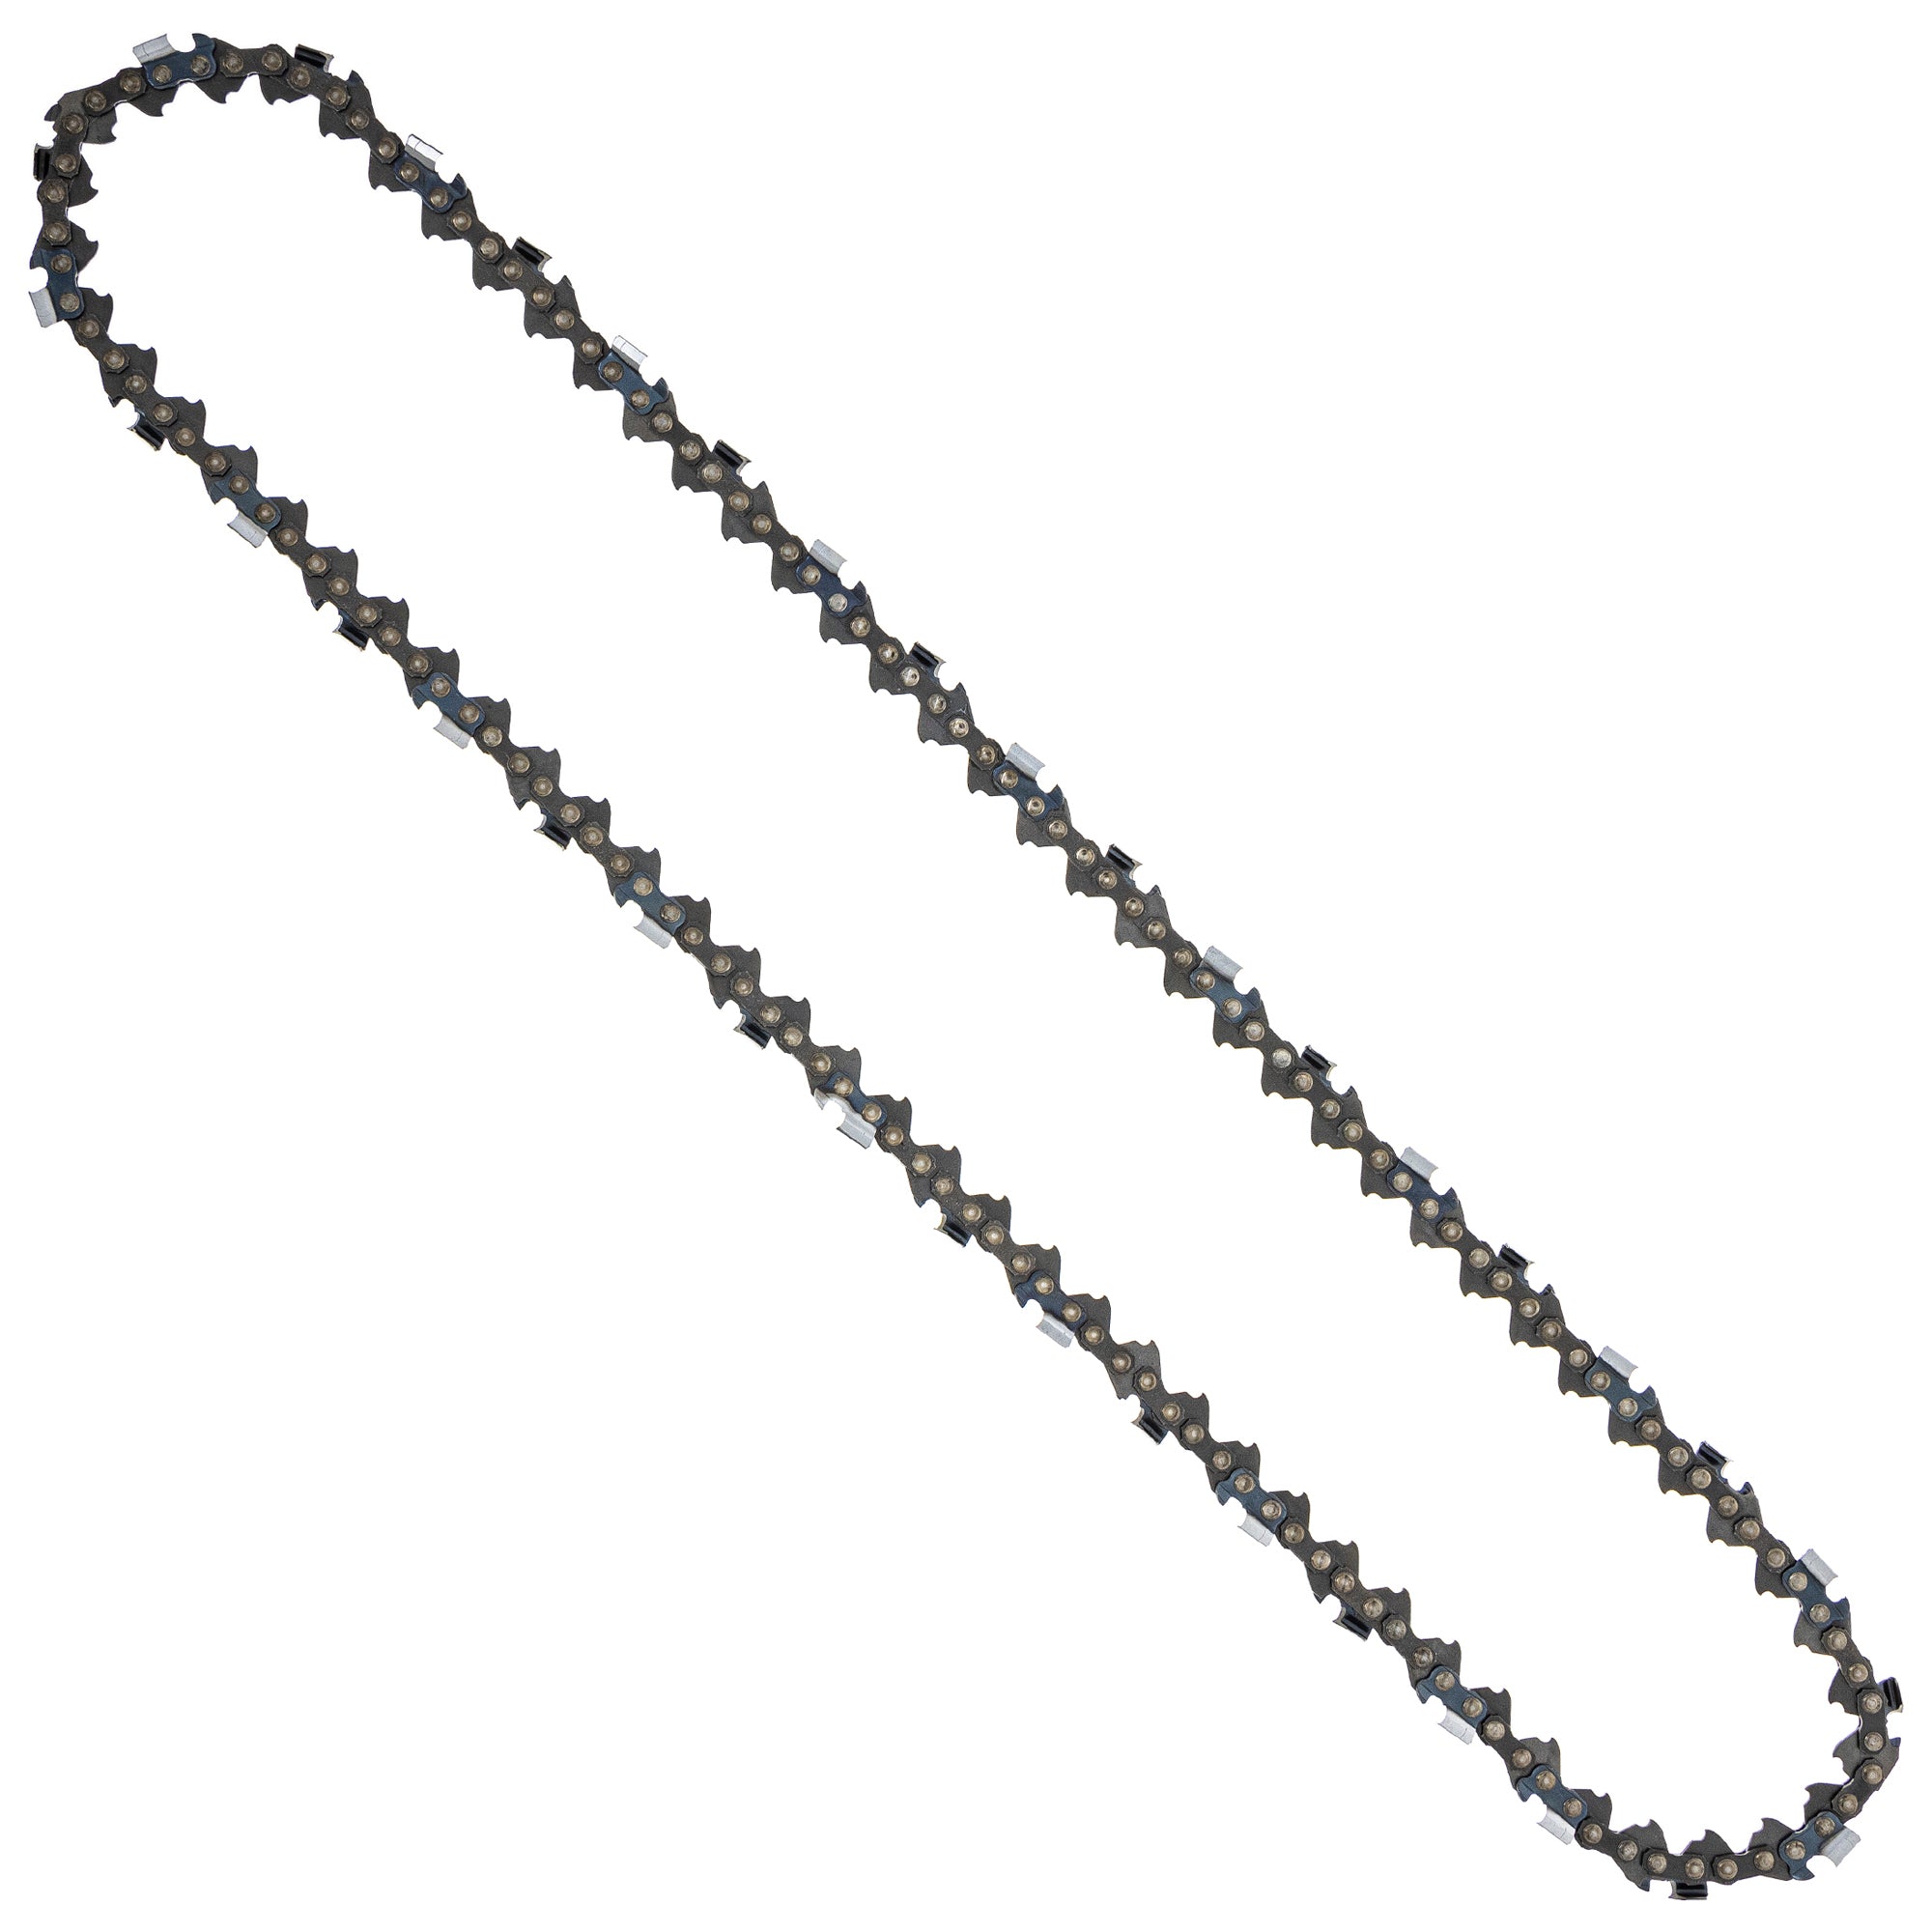 8TEN 810-CCC2398H Chain 5-Pack for zOTHER Oregon MS 634 30 040